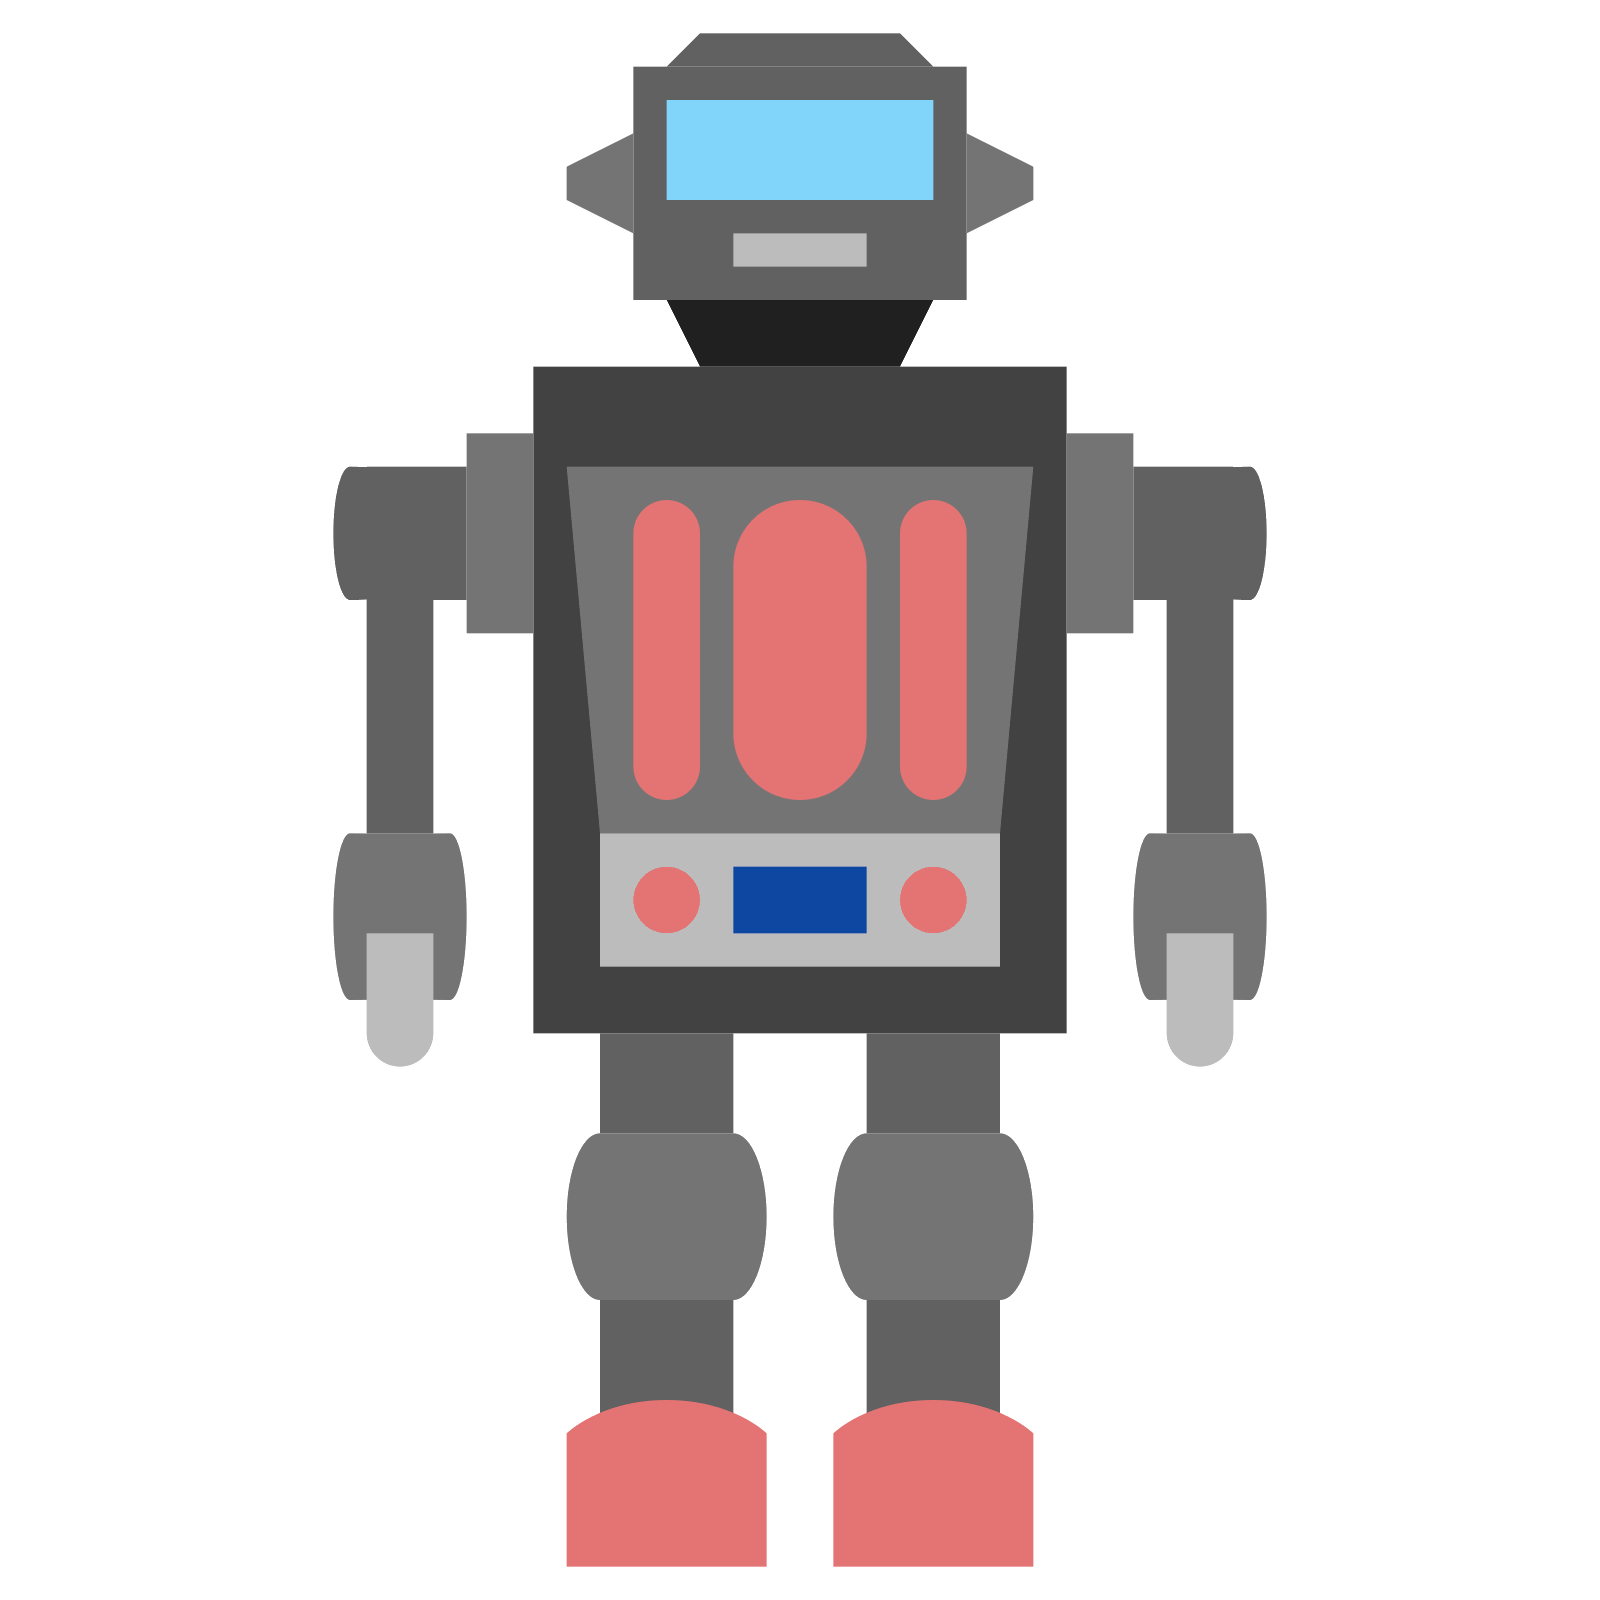 Mr. Hustler Robot Icon - free download, PNG and vector